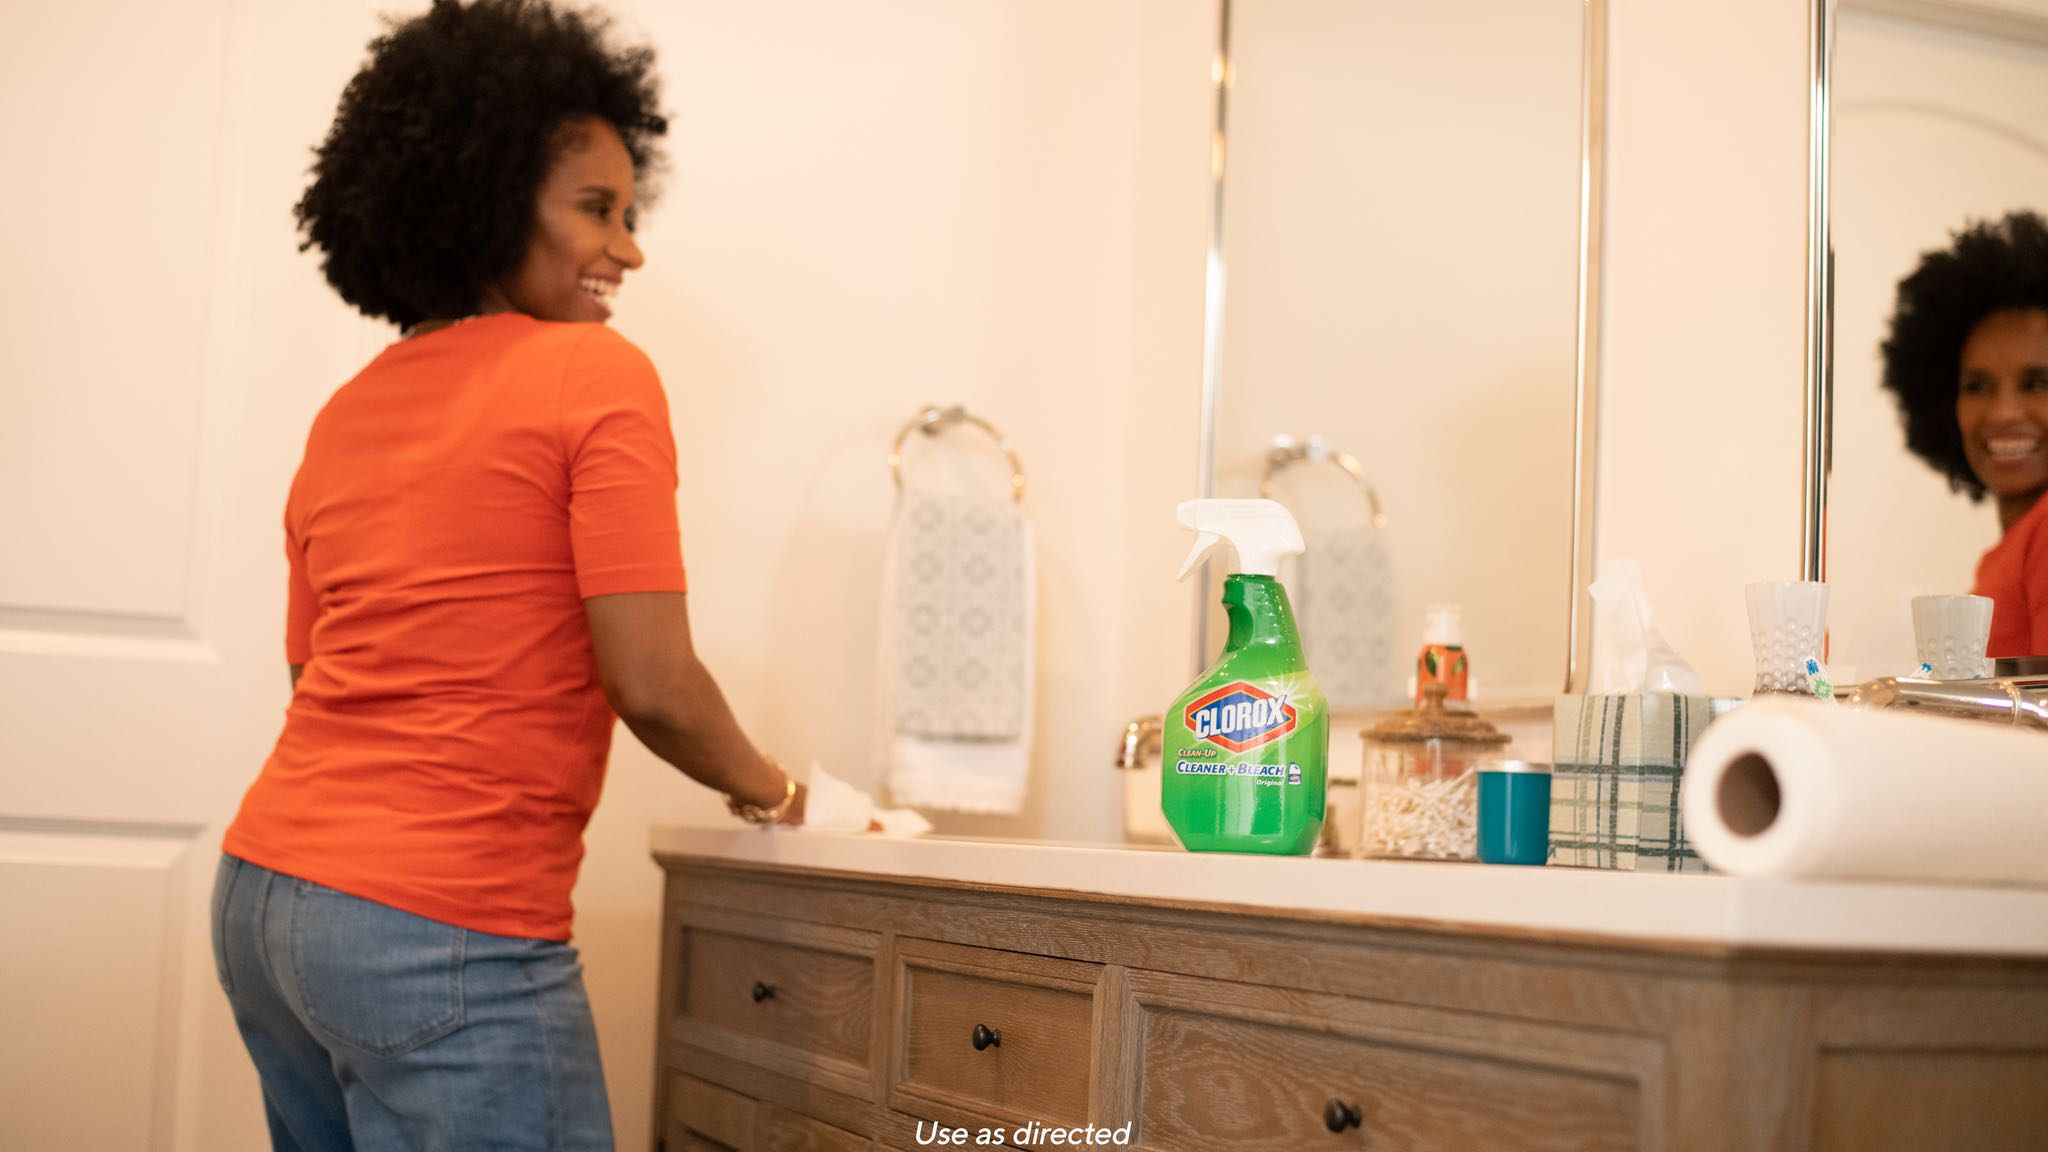 5 Ways Clorox Can Be Used To Clean A Home Before A Family Event